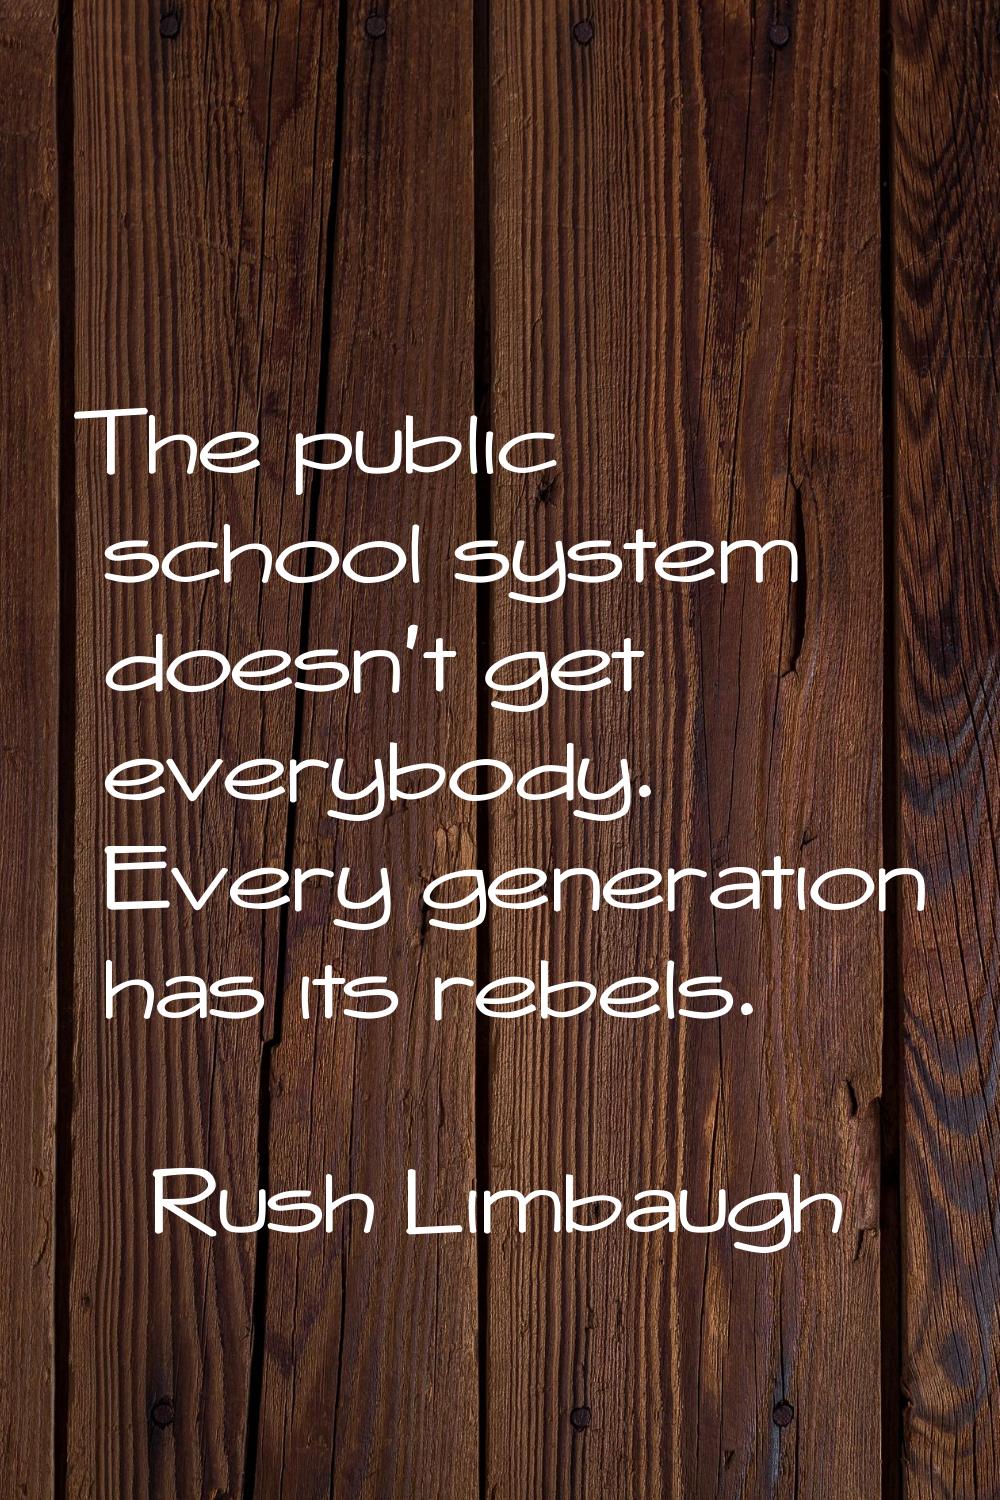 The public school system doesn't get everybody. Every generation has its rebels.